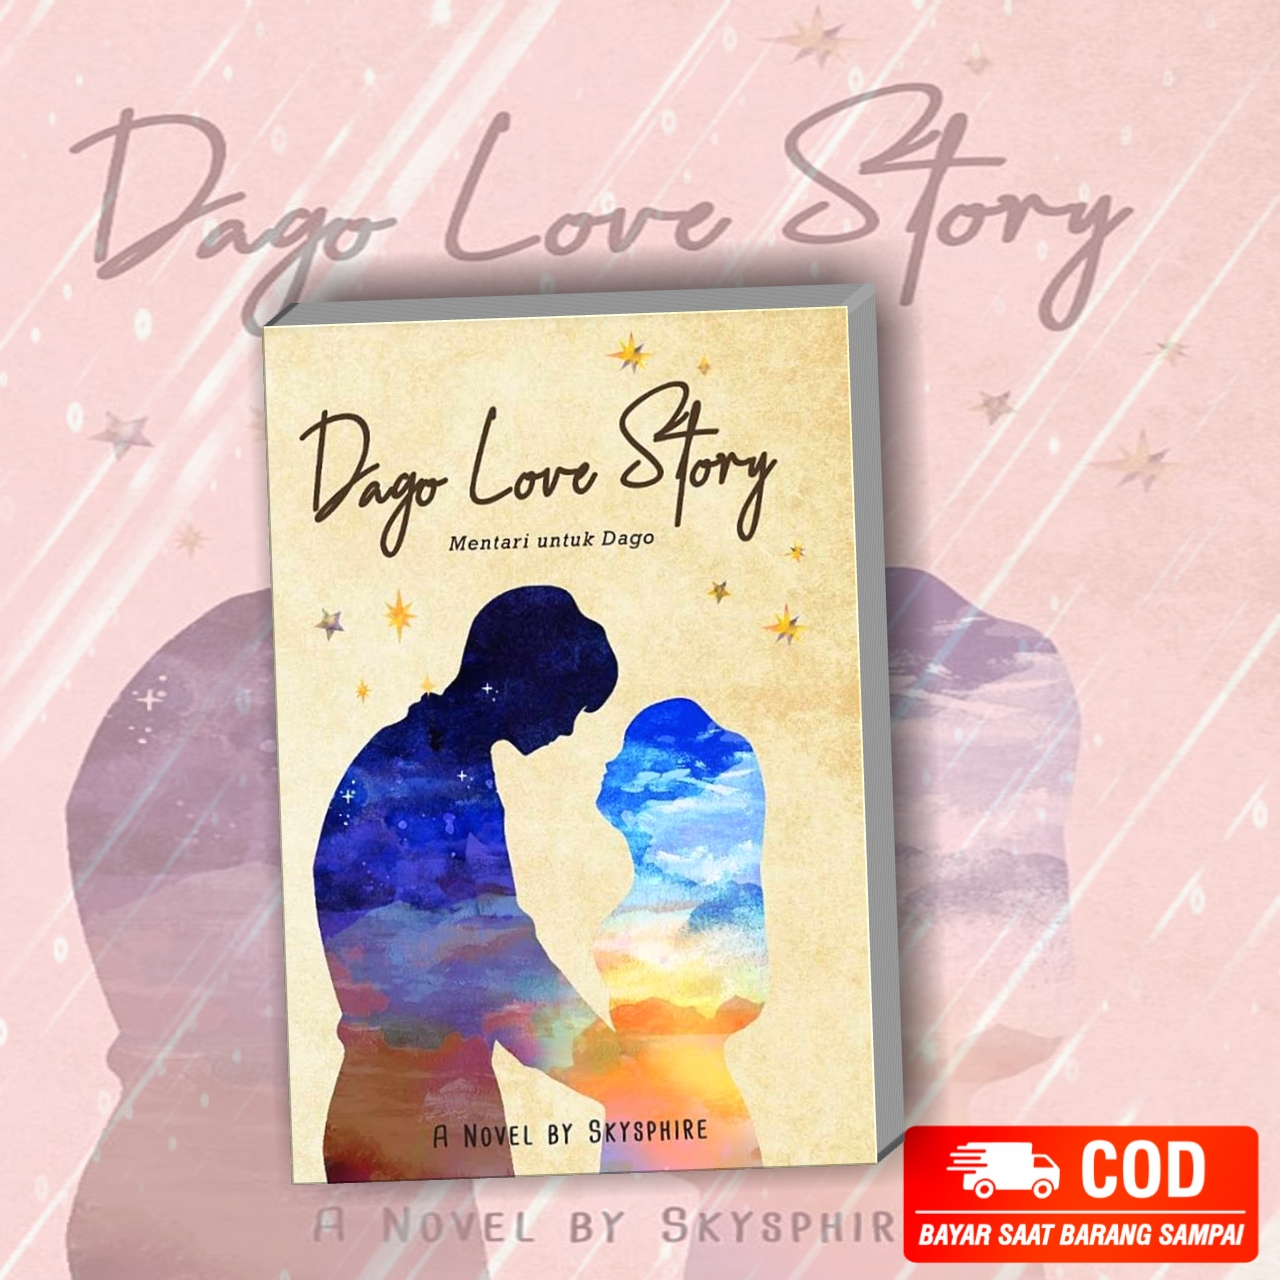 ashley rolling recommends drchatgyi love story ebook pic